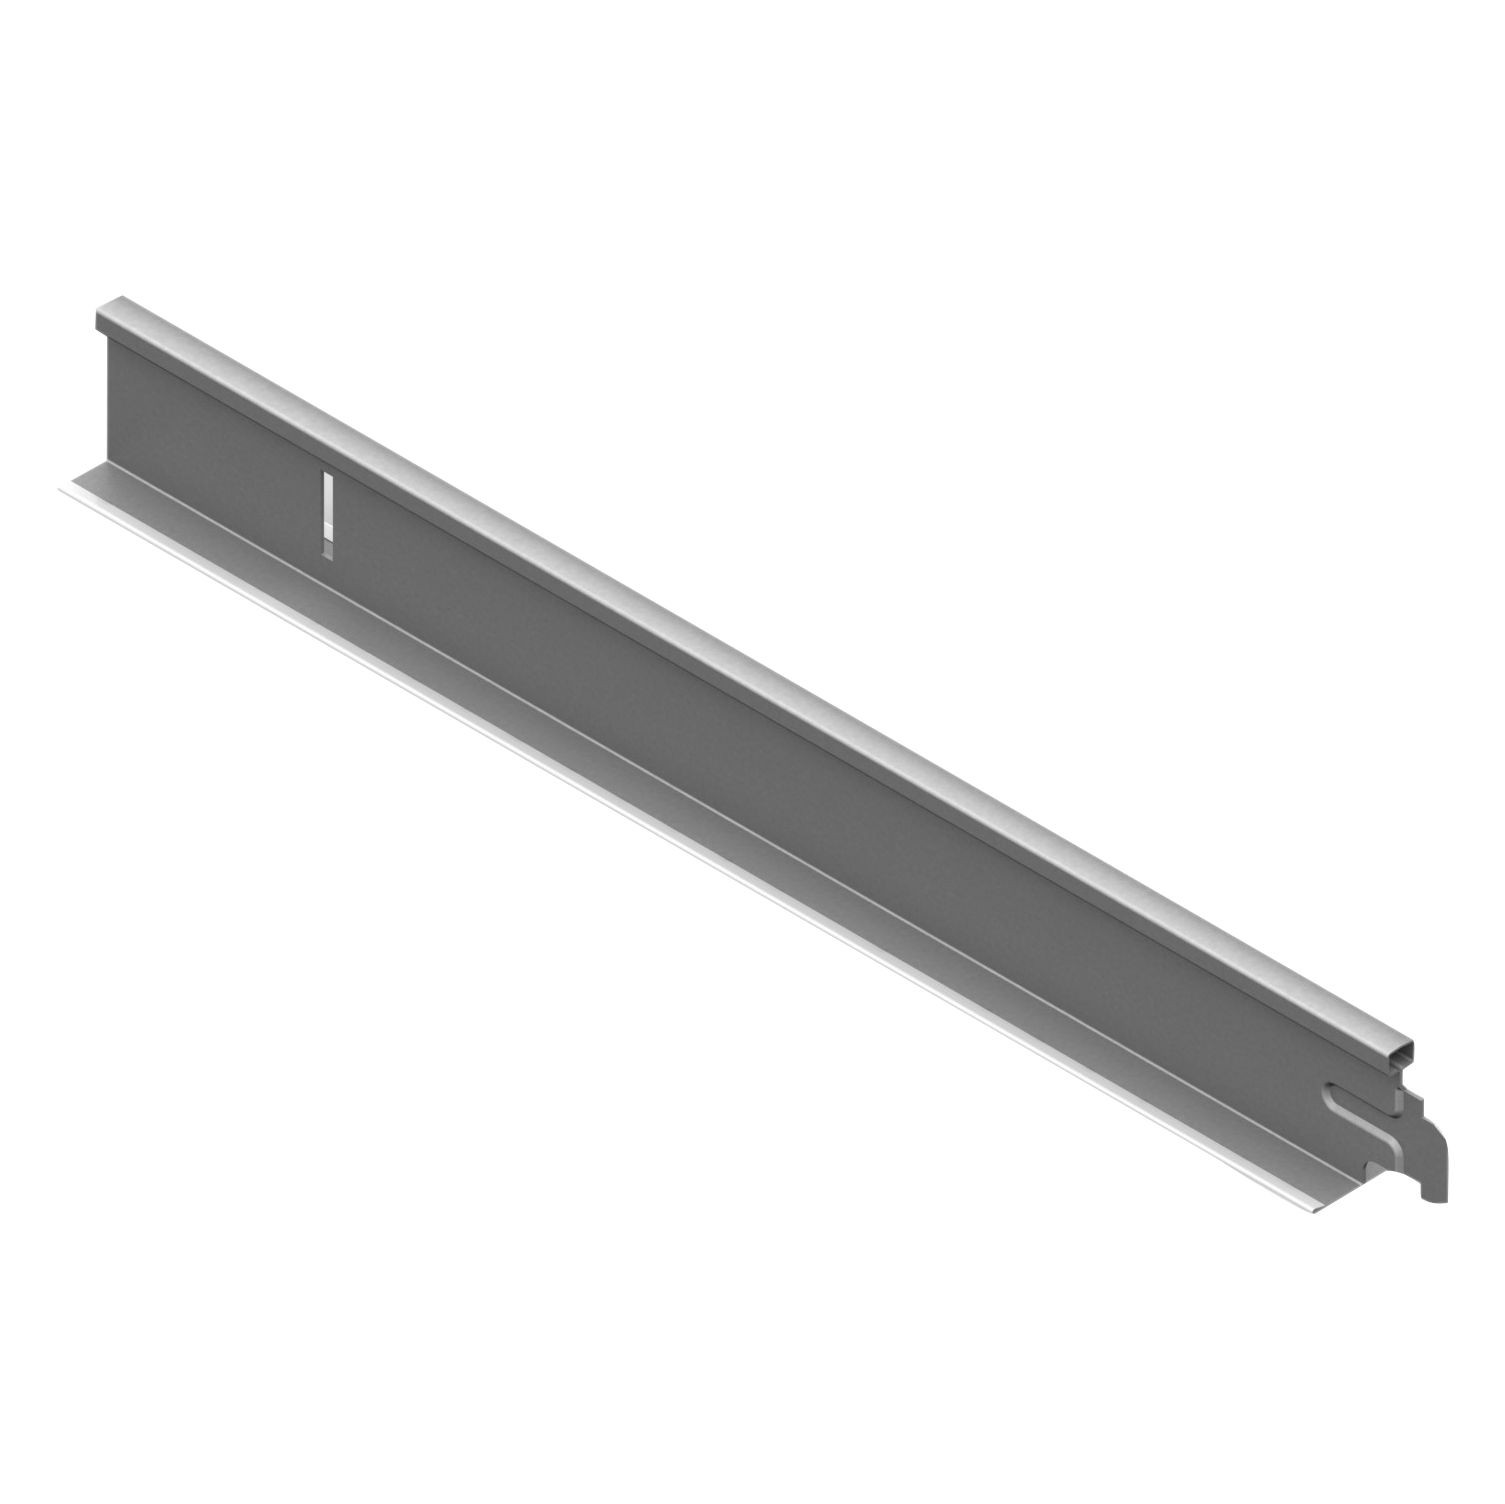 Accessories for cassette ceilings - Secondary profile for Rigips Quick Lock 24 x 1200 mm box ceiling, https:maxbau.ro